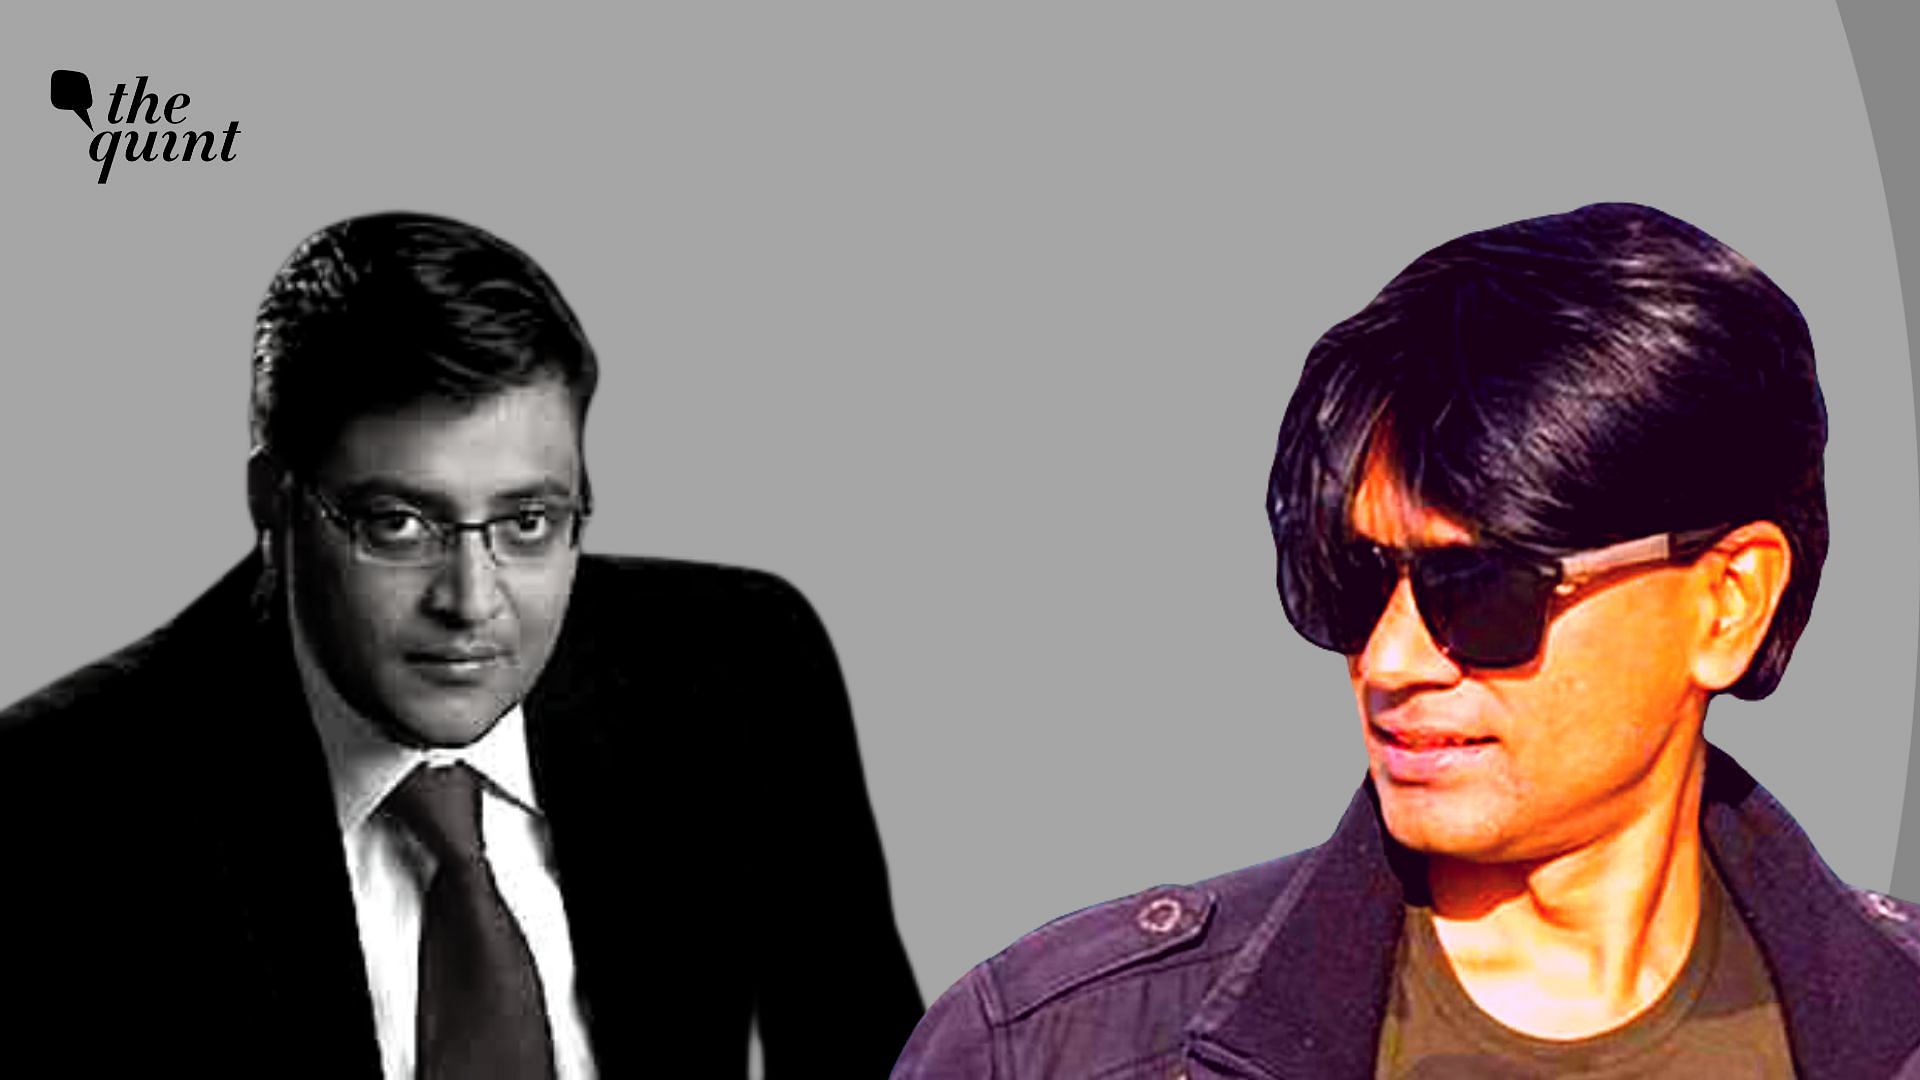 <div class="paragraphs"><p>As the Supreme Court placed reliance upon its <a href="https://www.thequint.com/topic/arnab-goswamihttps://www.thequint.com/topic/arnab-goswami">Arnab Goswami </a>judgment from 2020, in its more recent judgment granting interim bail to Alt-News <a href="https://www.thequint.com/news/law/supreme-courts-call-to-not-bar-zubair-from-tweeting-a-win-for-press-freedom">Muhammed Zubair</a>, one couldn’t help but recall that summer afternoon when Goswami, a famous TV news anchor, was given bail in an abetment to suicide case.</p></div>